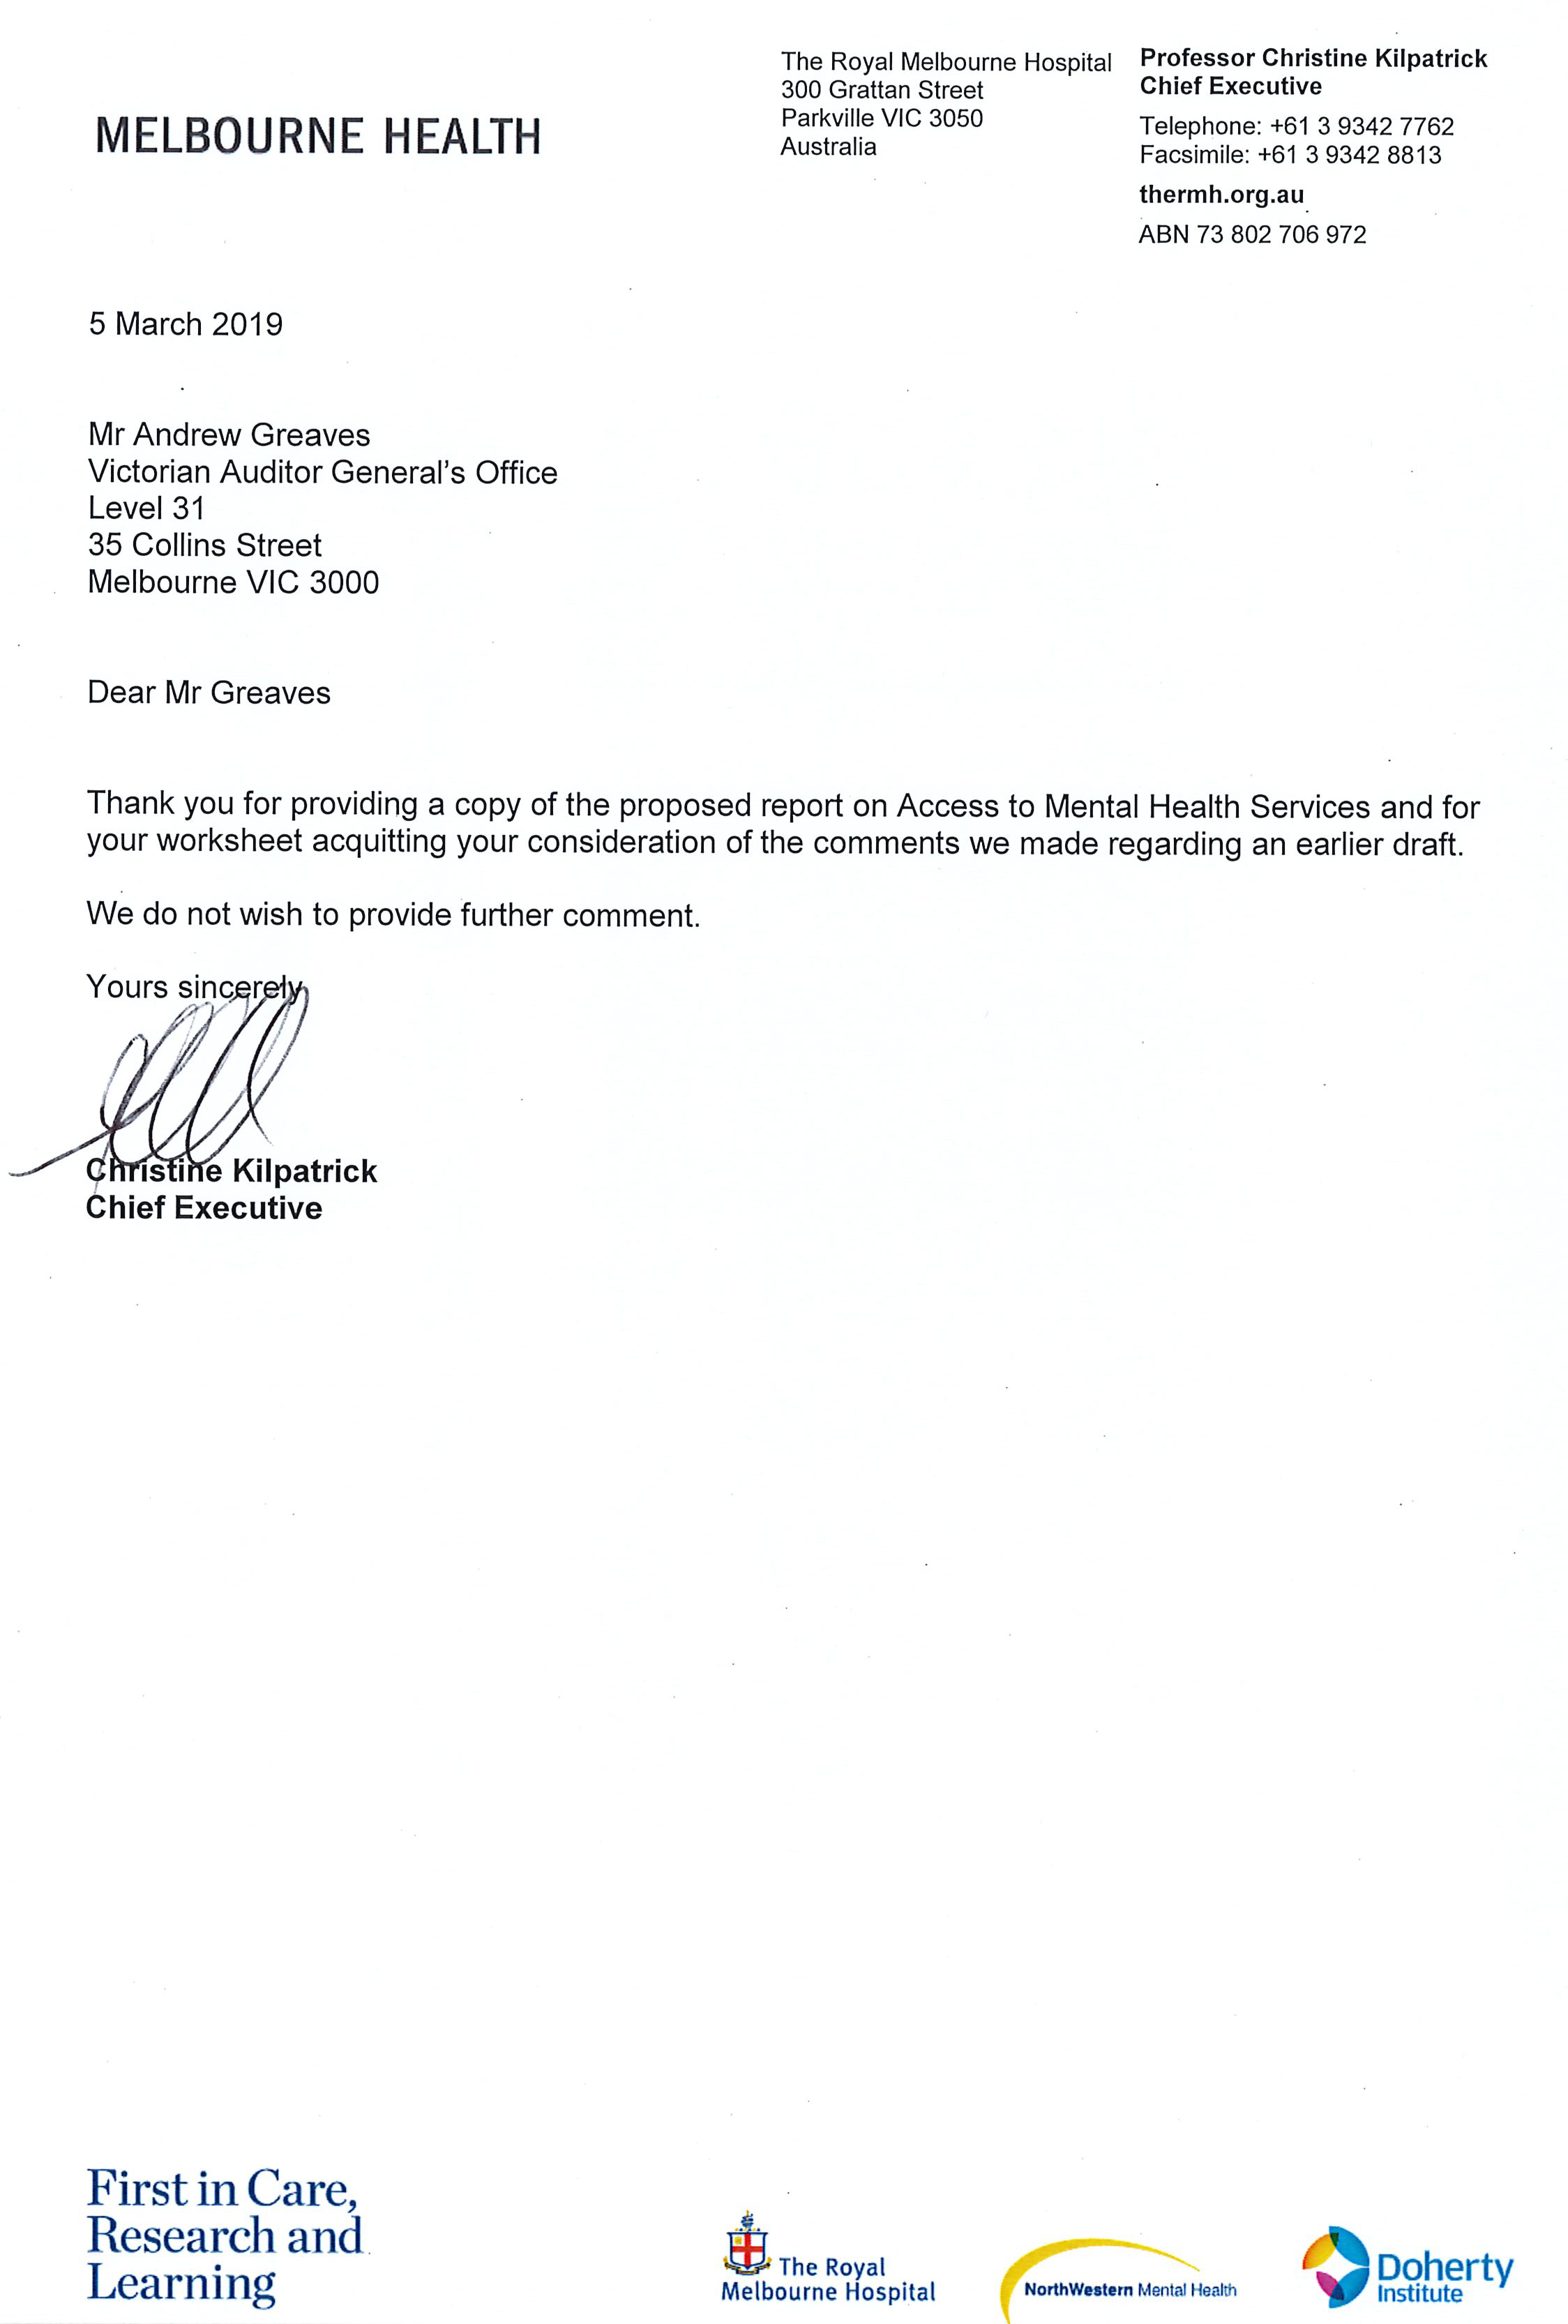 Response provided by the Chief Executive, Melbourne Health